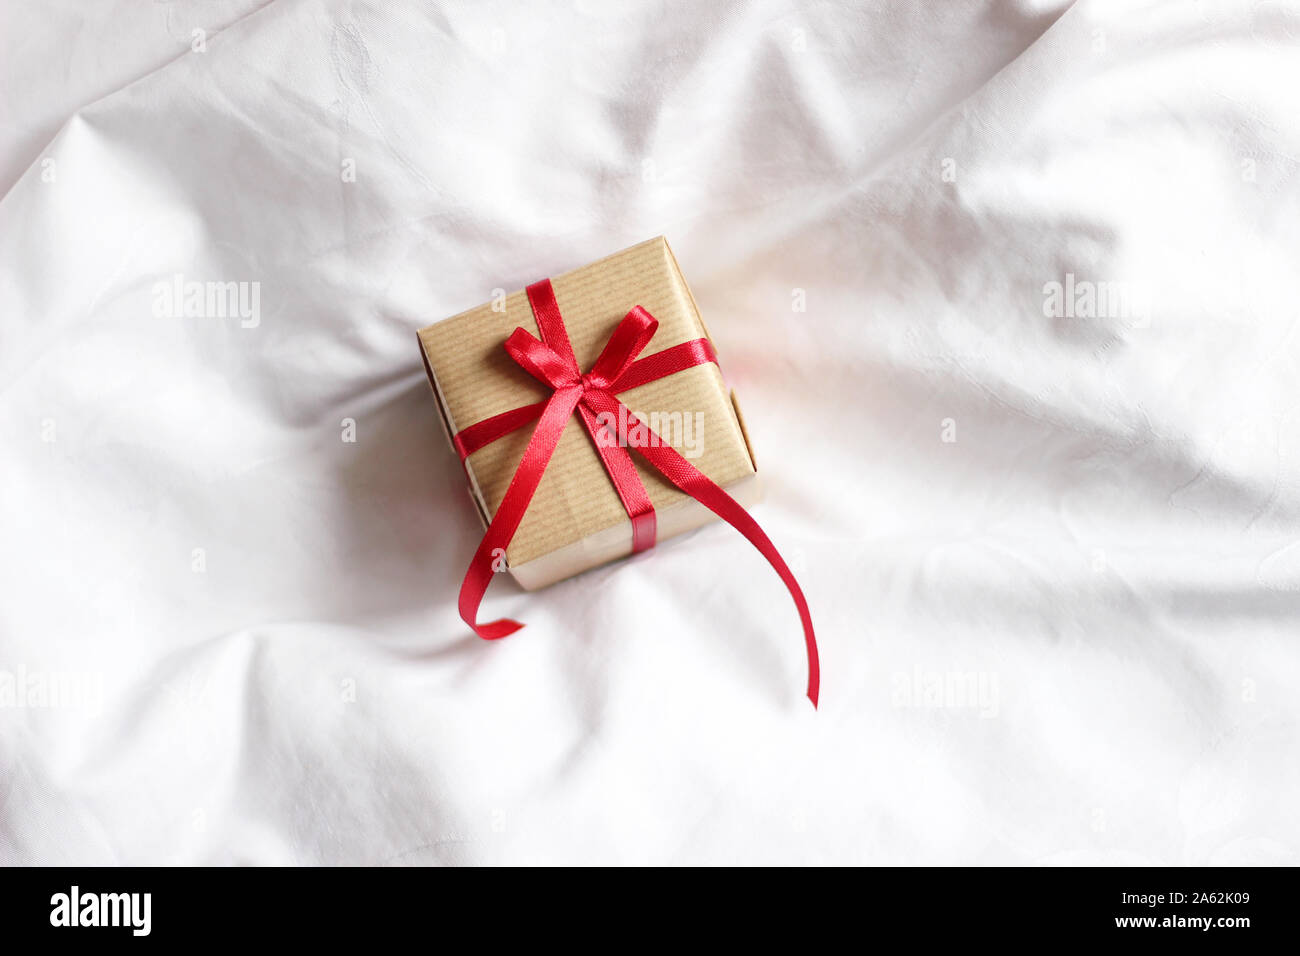 Present Box Wrapped in Kraft Paper Decorated with Red Ribbon Bow. Festive Christmas Gifts Wrapping. Stock Photo